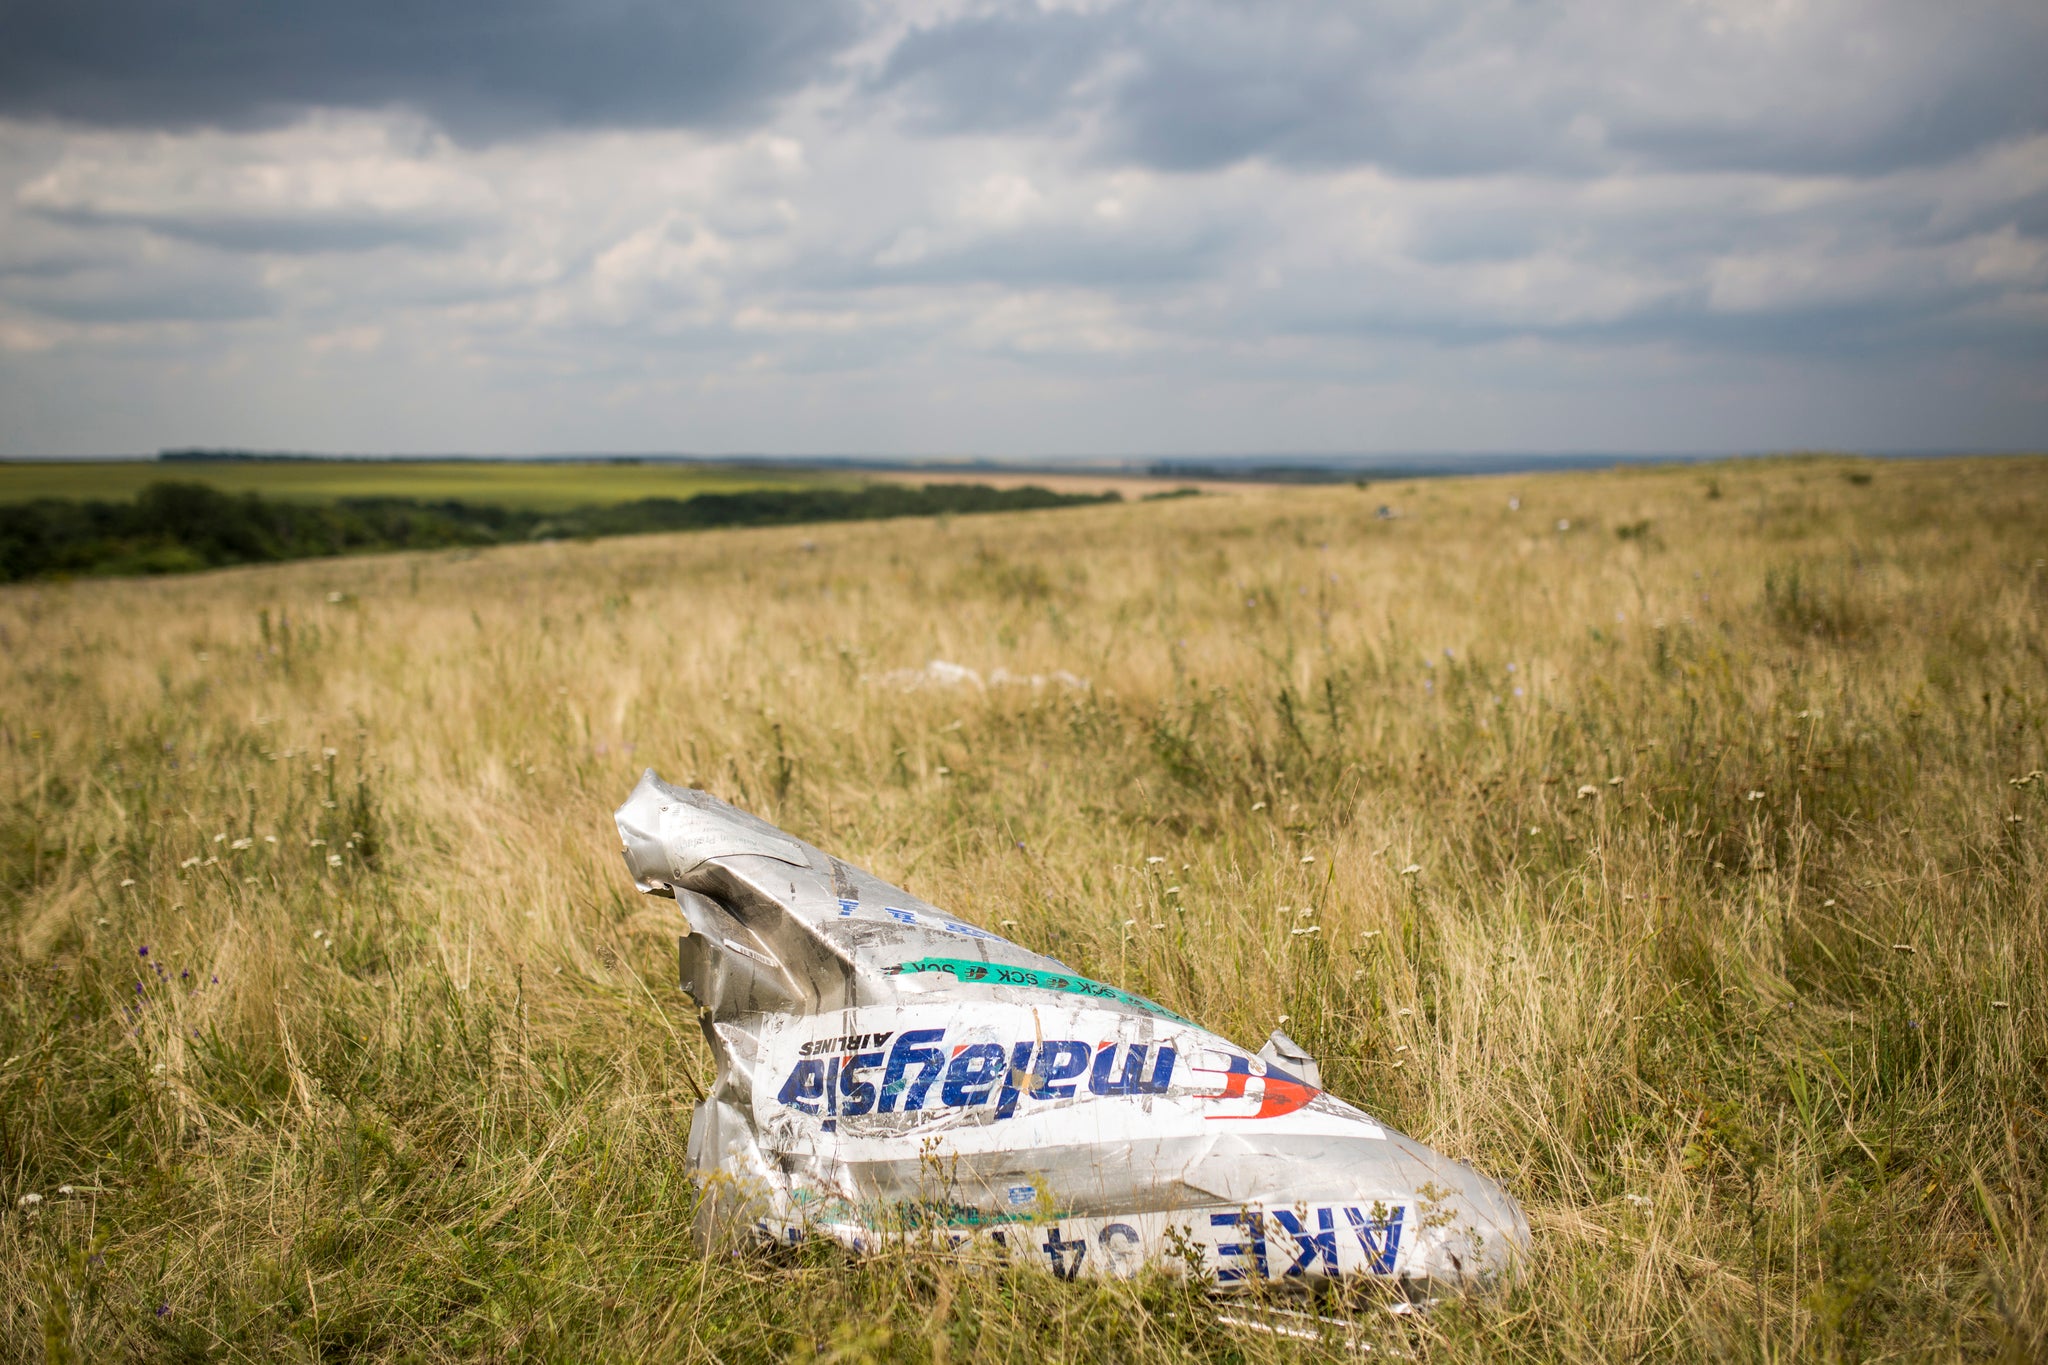 Wreckage from Malaysia Airlines flight MH17 lies in a field in Grabovo, Ukraine. (Photo by Rob Stothard/Getty Images)